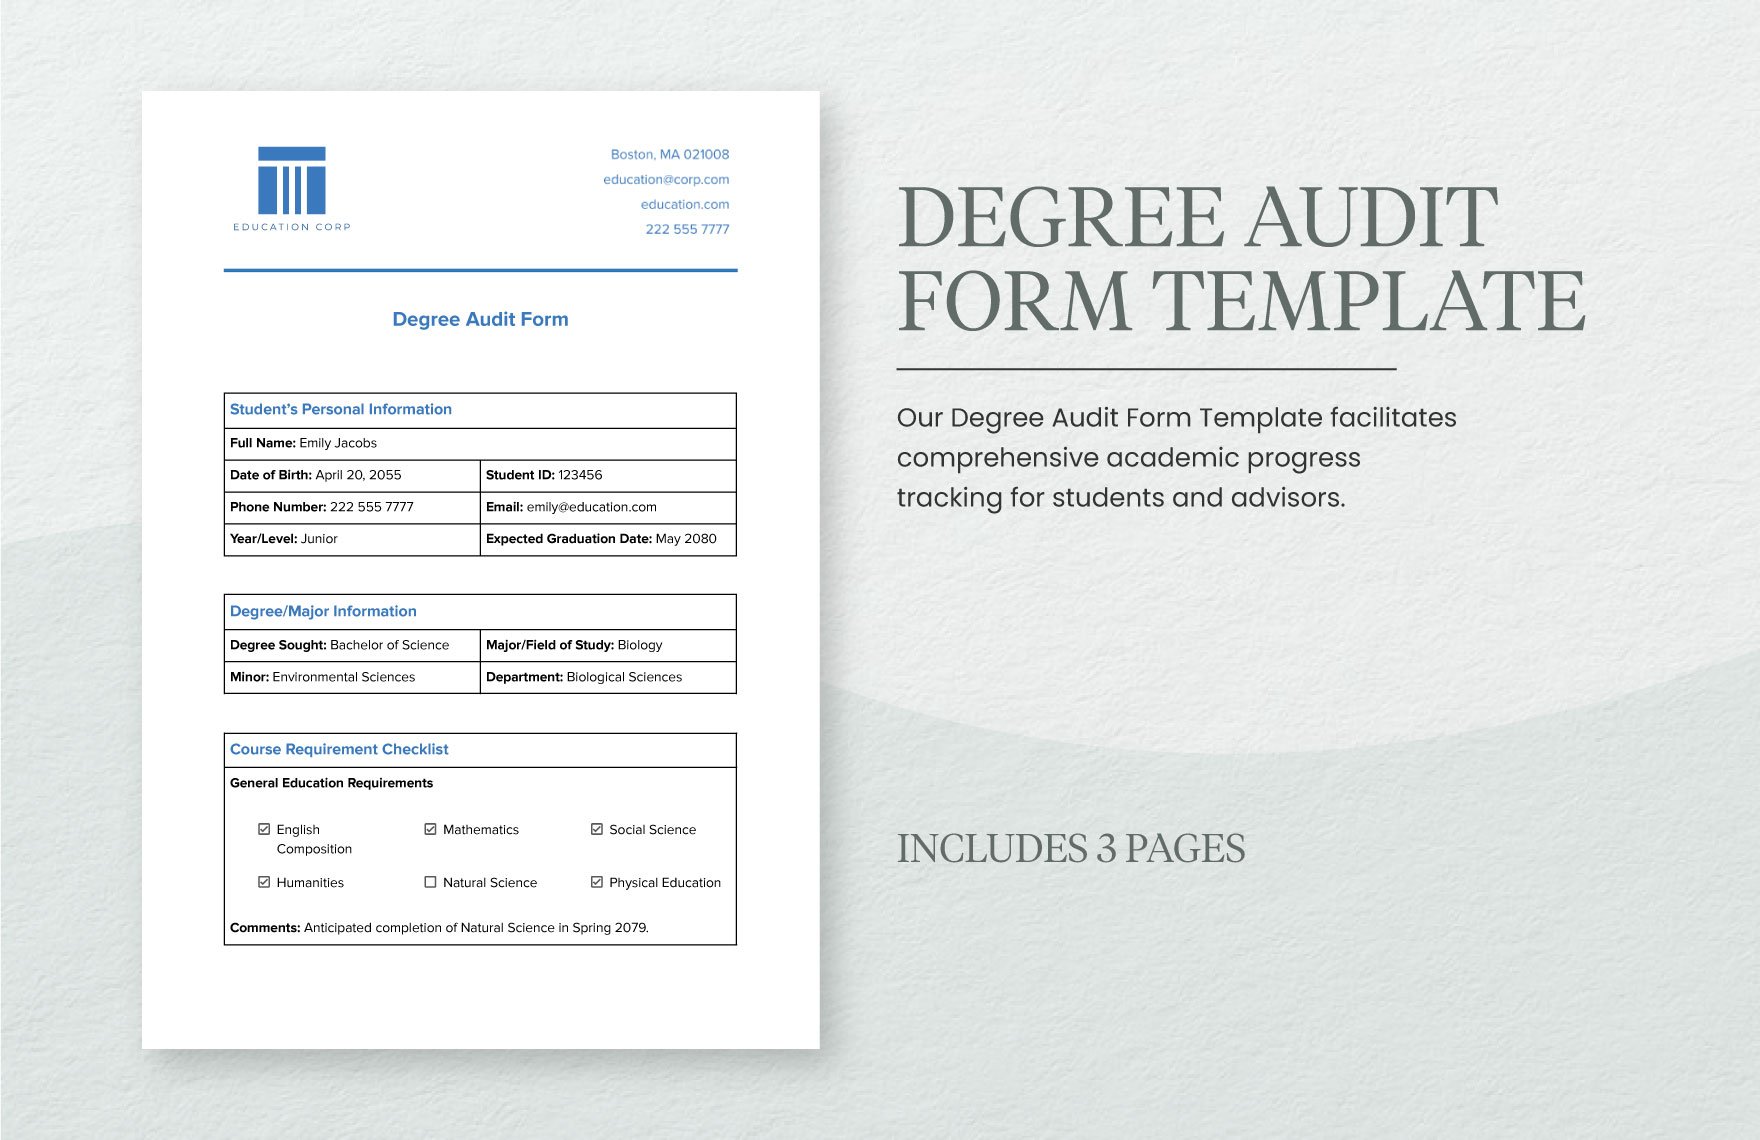 Degree Audit Form Template in Word, Google Docs, PDF